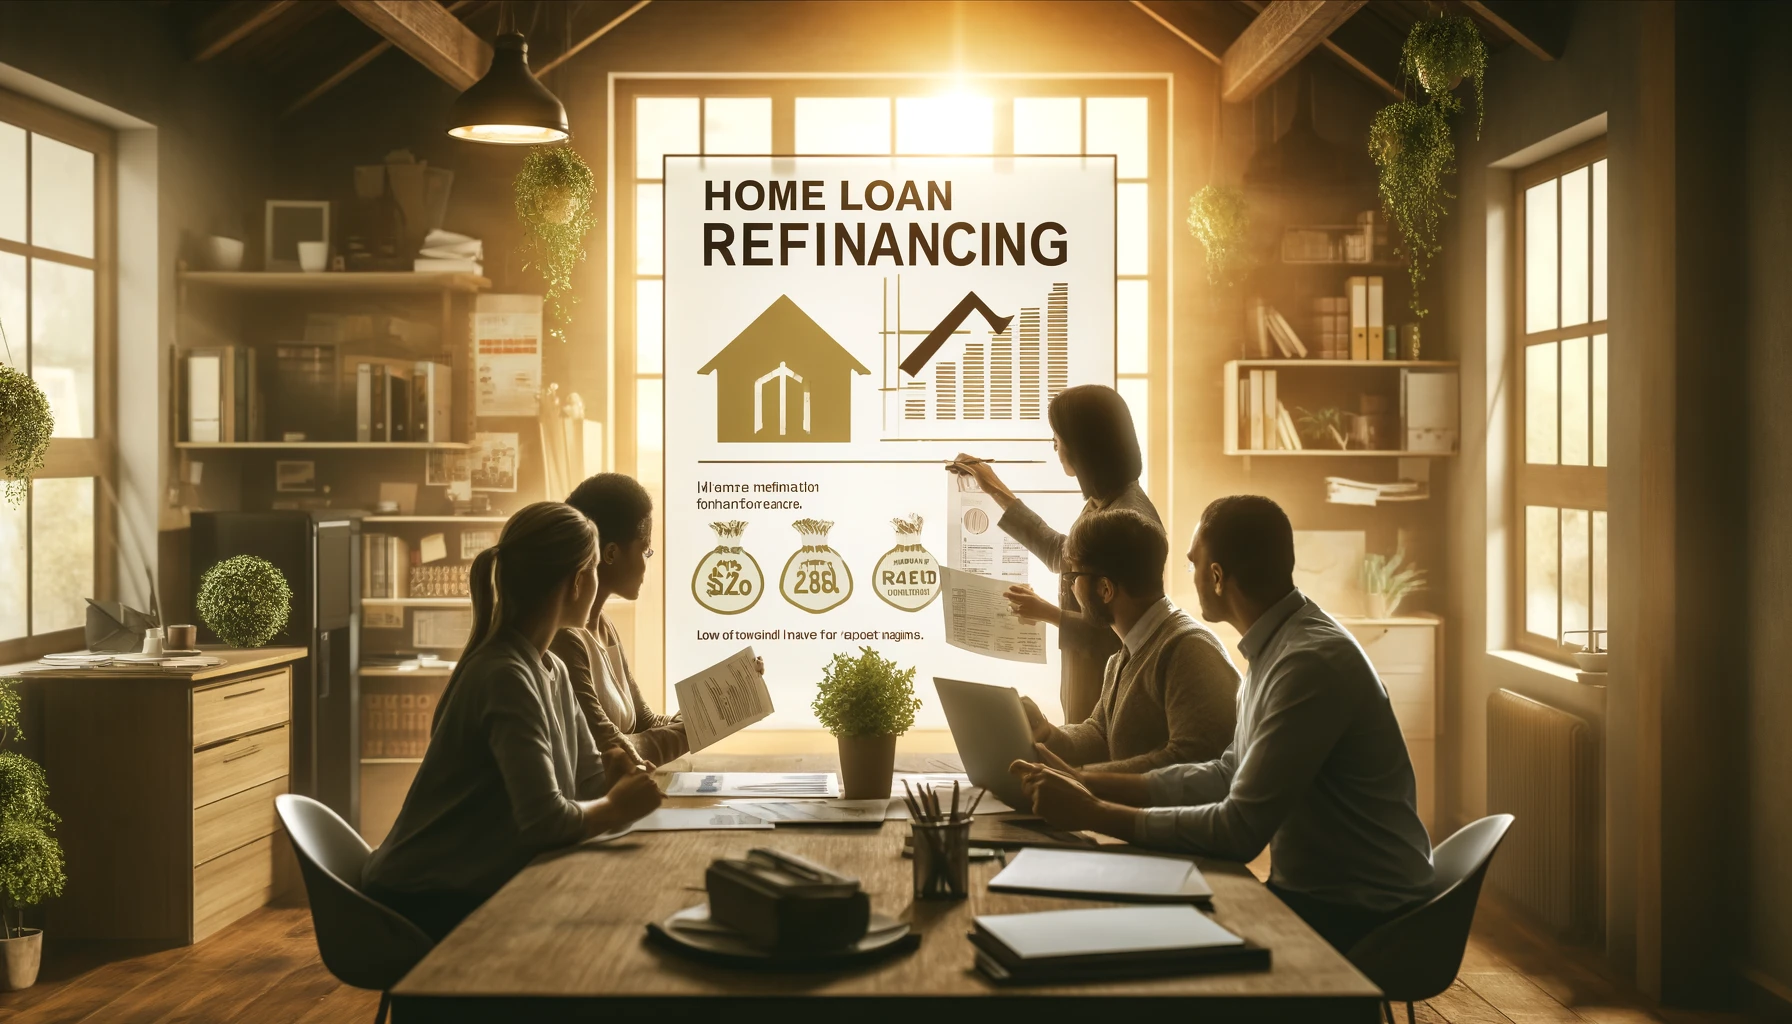 A family reviewing documents and using a calculator to understand the benefits of refinancing their home loan with ScaleMortgage, symbolising smart financial planning in a warm, optimistic home environment.